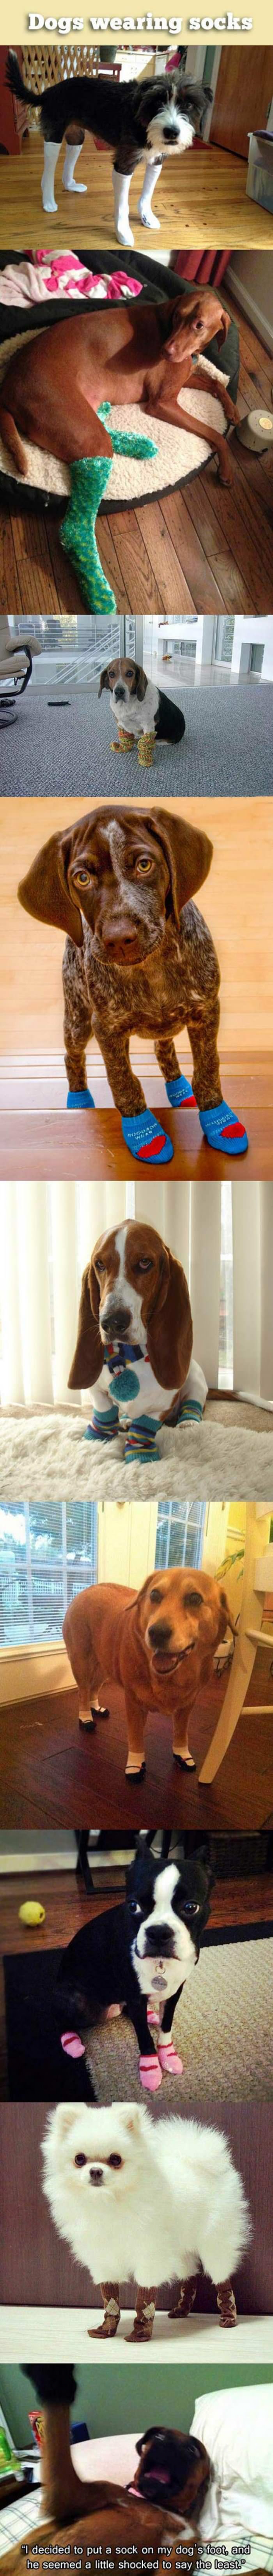 dogs wearing socks funny picture